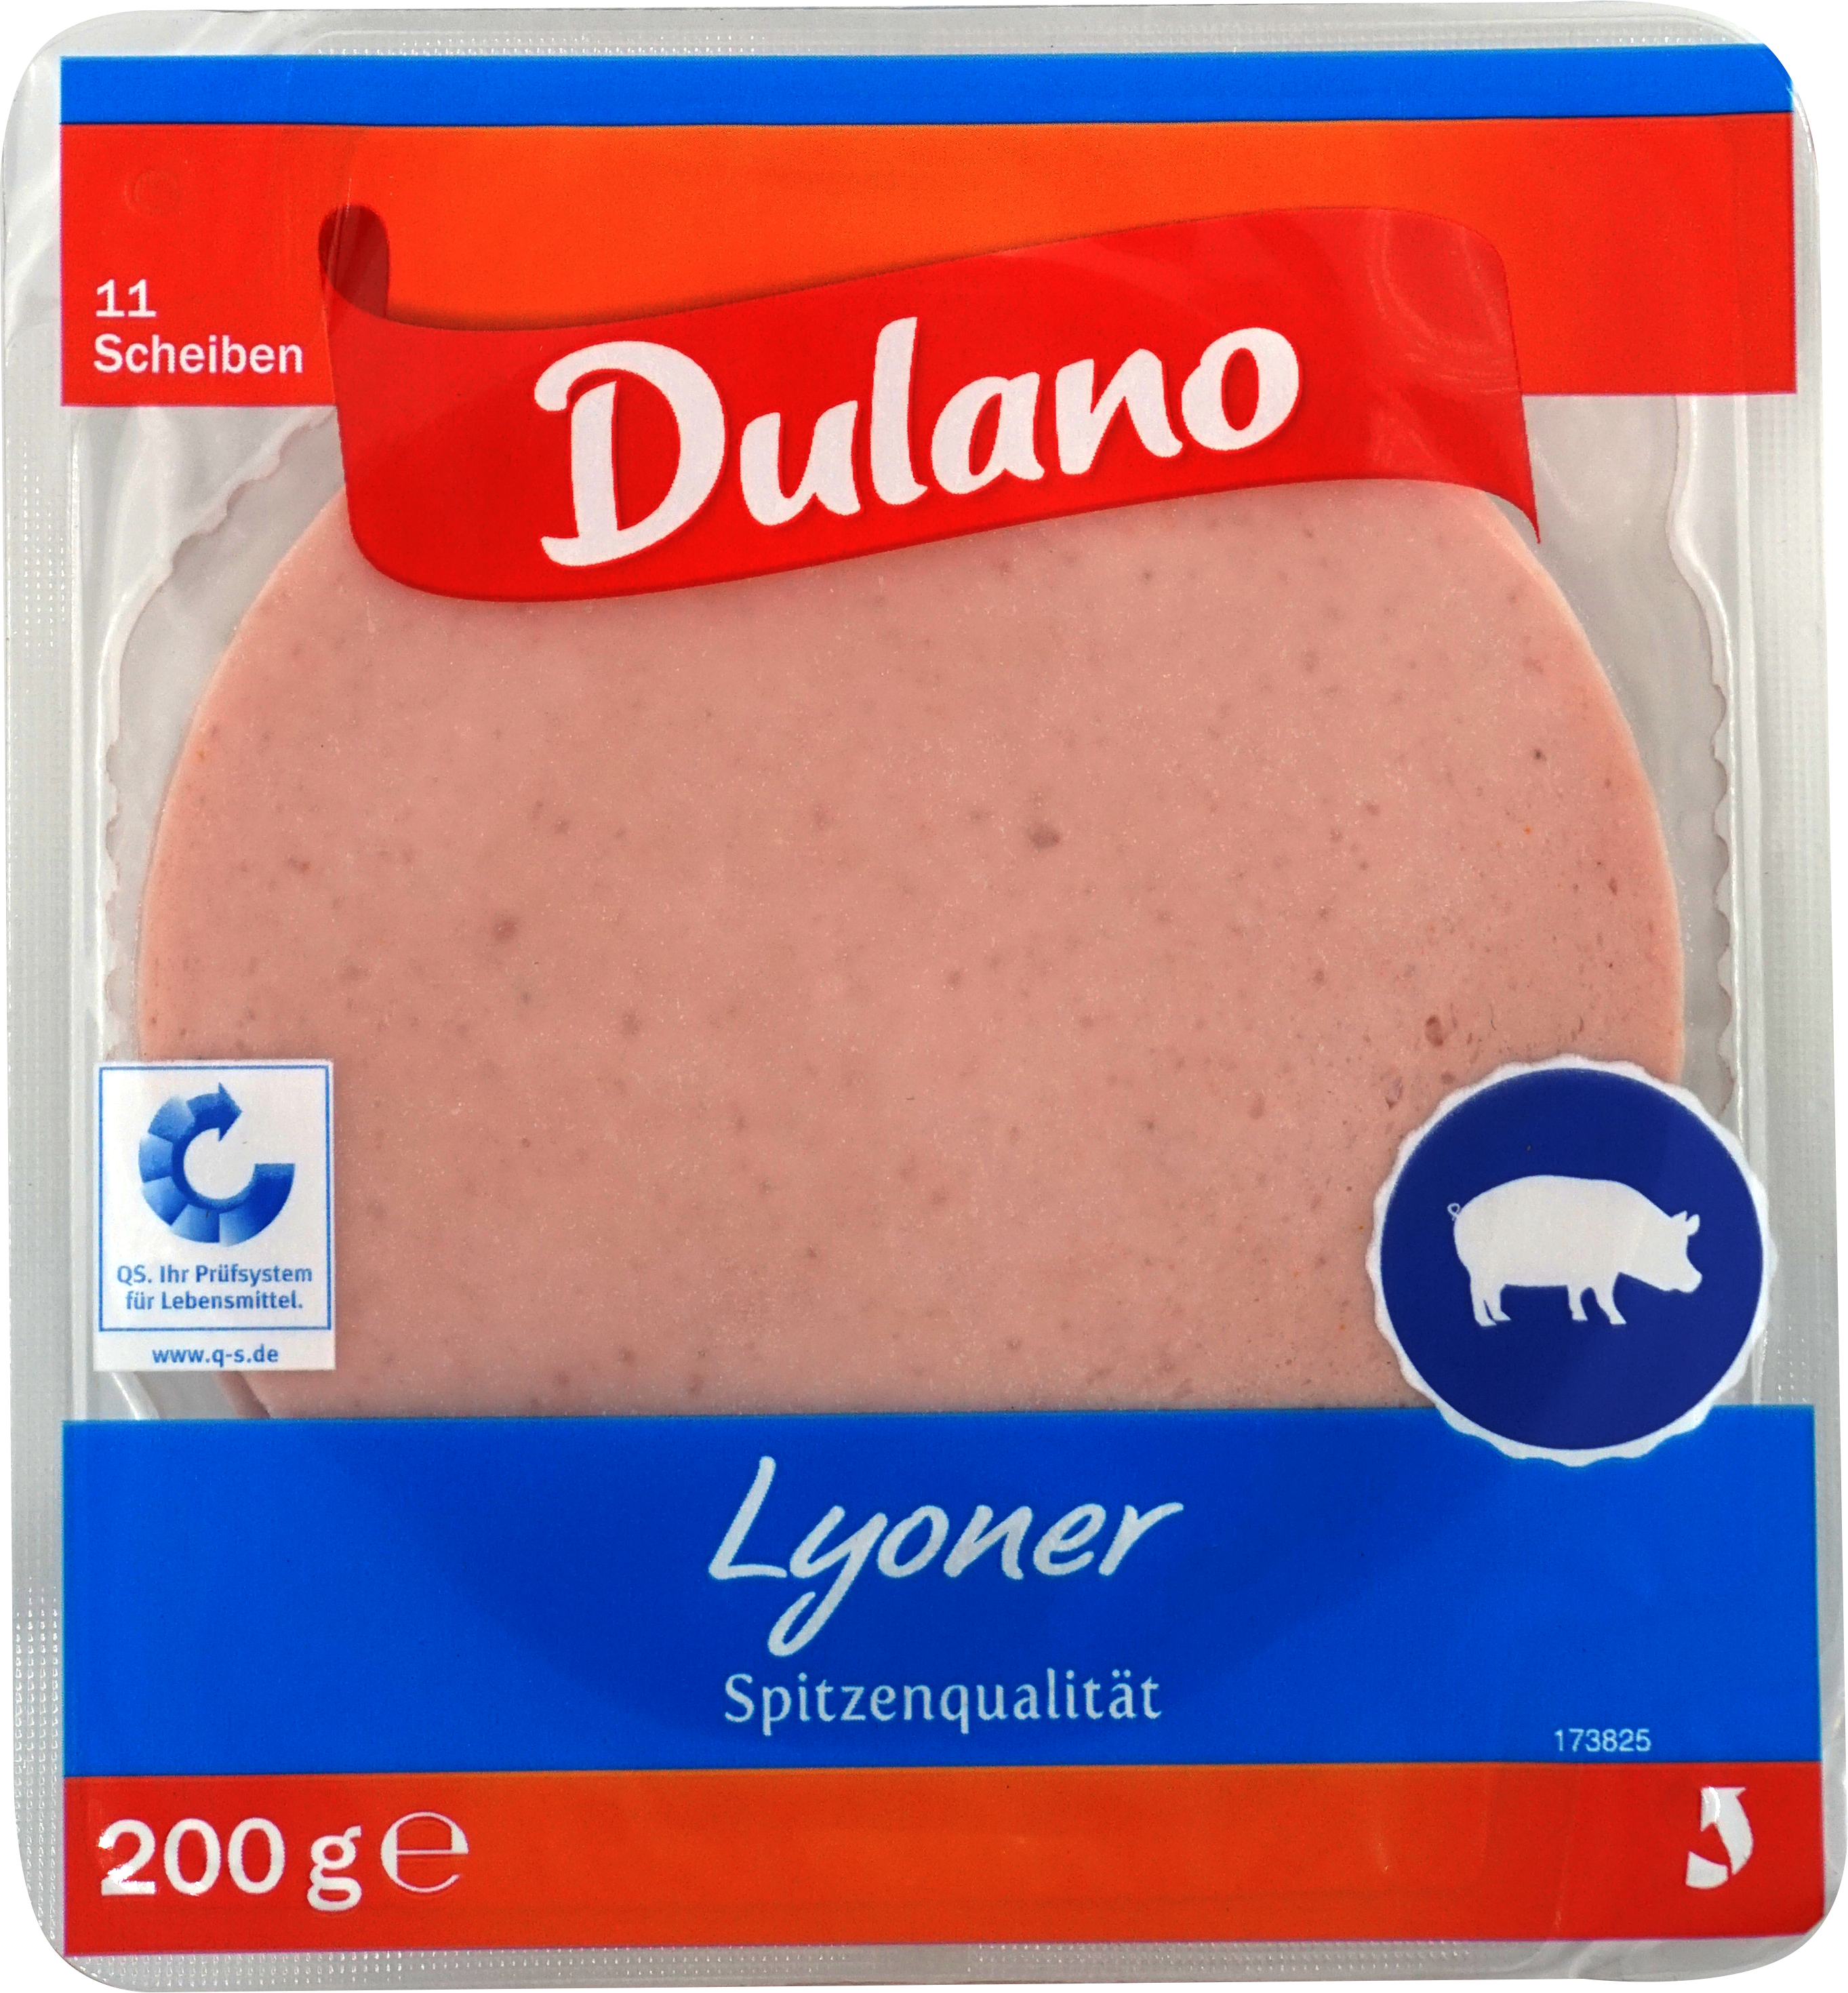 Dulano (Lidl) · Lyoner (200 Pork Meat/Poultry - / Prepared/Processed Germany GmbH Butchers The TFB Sausages Nortrup Family Prepared/Processed - grams) Meat/Poultry/Sausages Sausages Produktionsstätten Food - mynetfair Tobacco / · Beverage